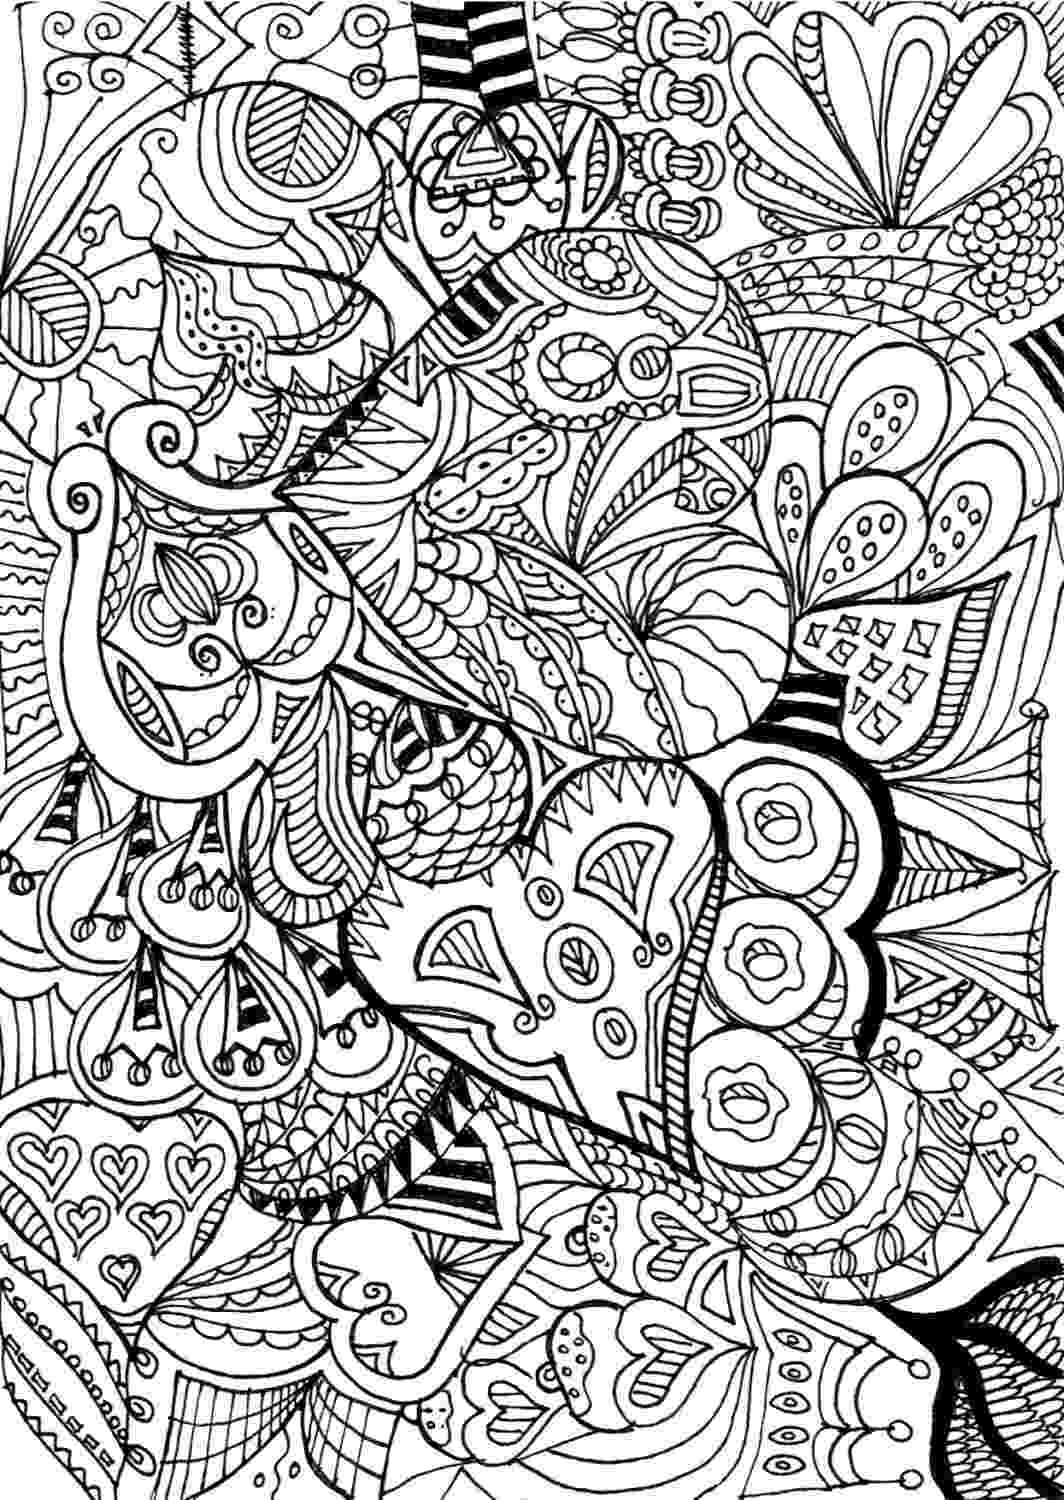 color zentangle zentangle coloring page color zentangle 